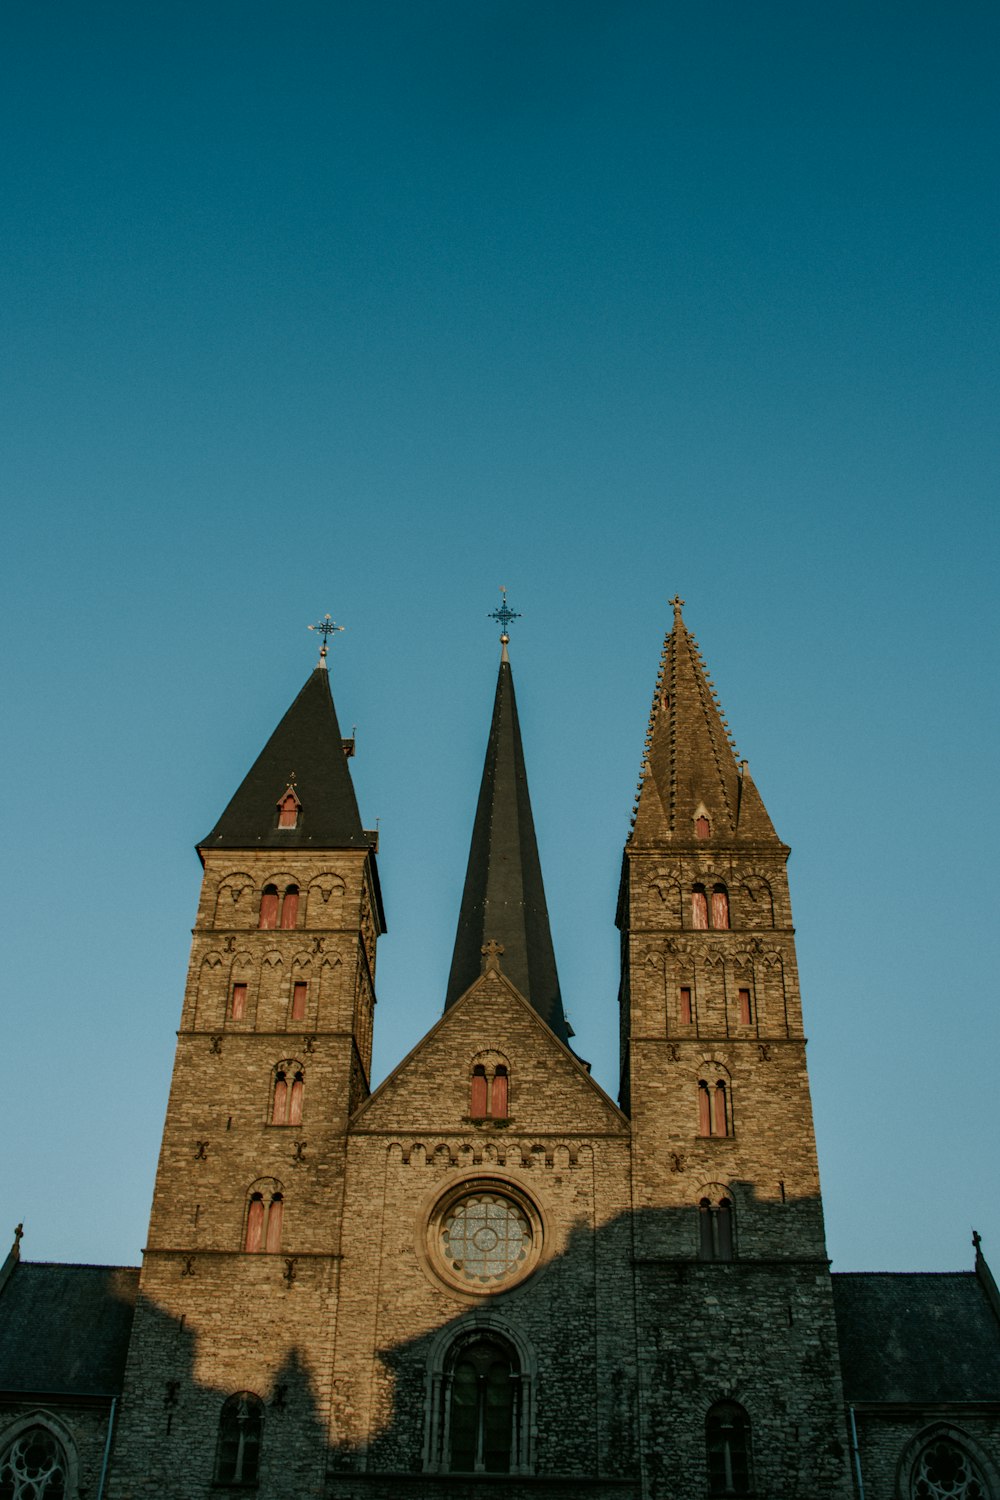 a large church with two towers and a clock